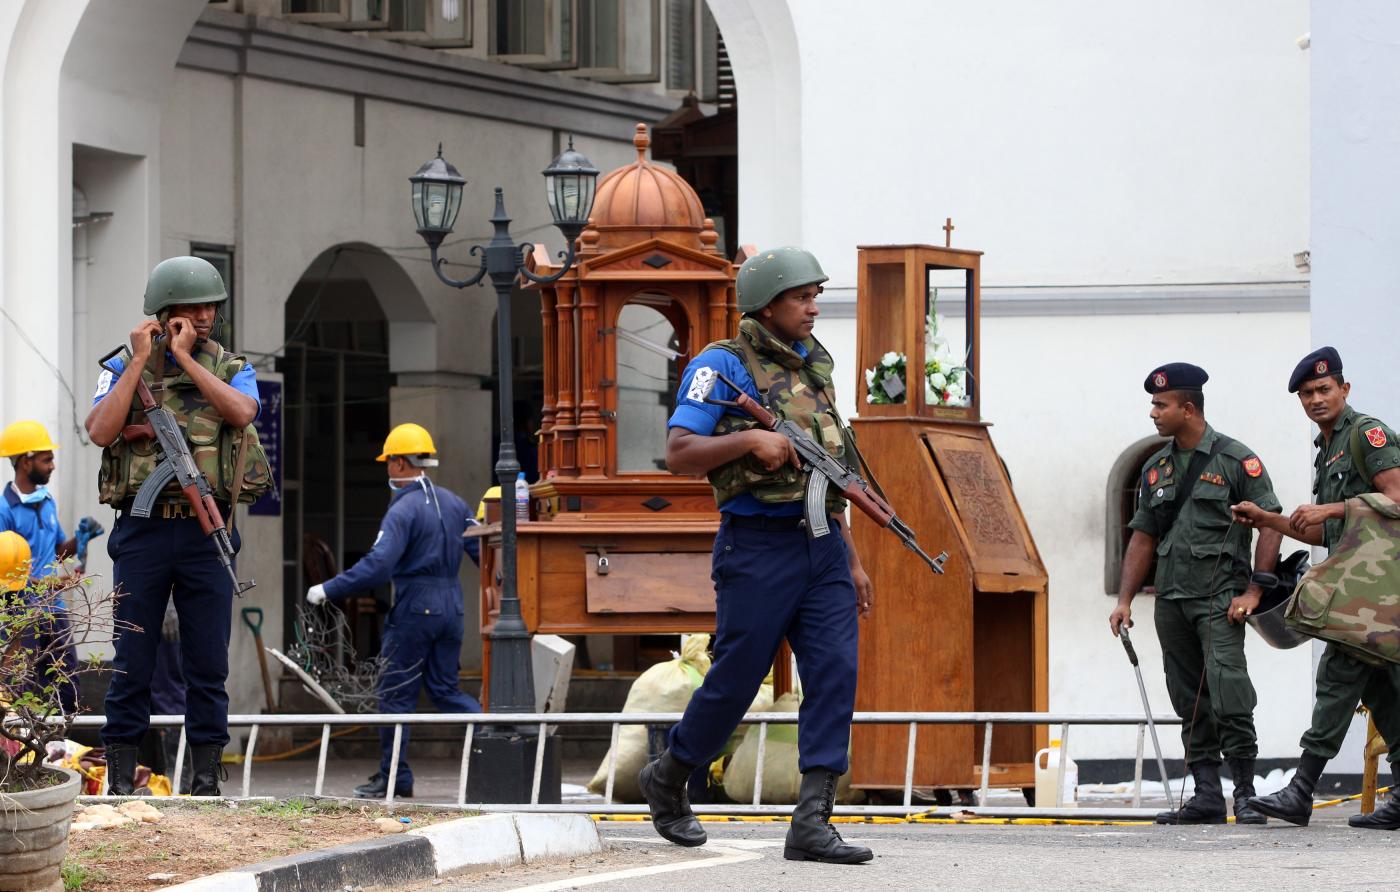 COLOMBO, April 27, 2019 (Xinhua) -- Security forces are seen outside St. Anthony's Church, one of the targets in a series of bomb blasts targeting churches and luxury hotels on Sunday, in Colombo, Sri Lanka, on April 27, 2019. (Xinhua/A. Hapuarachchi/IANS) by A.HAPUARACHCHI.